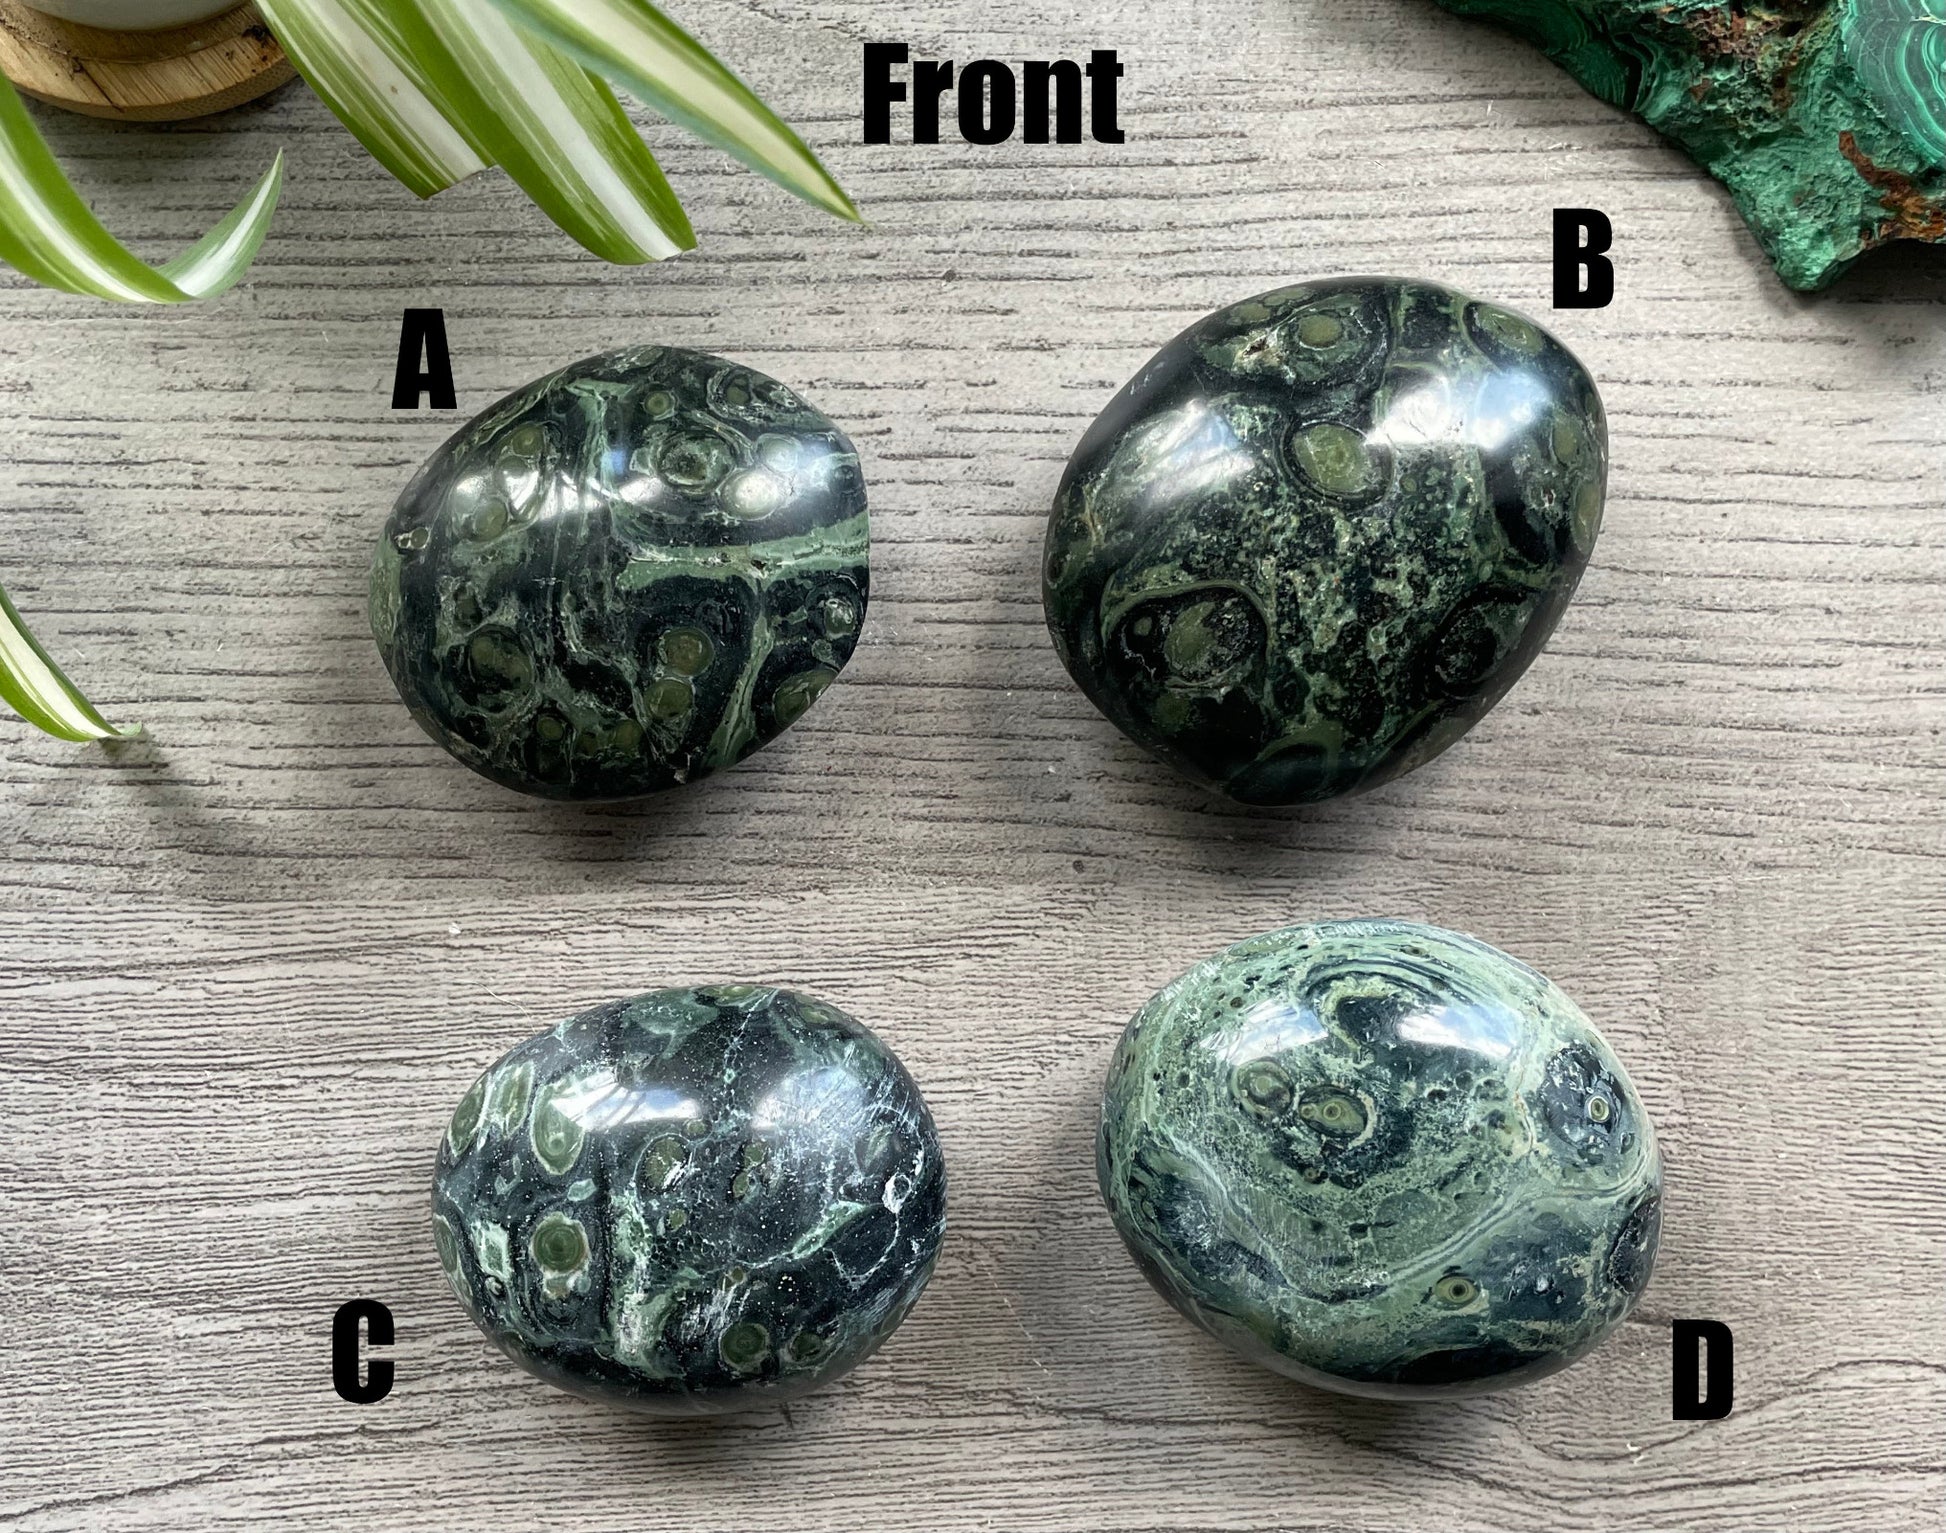 Pictured are various polished kambaba jasper palm stones.